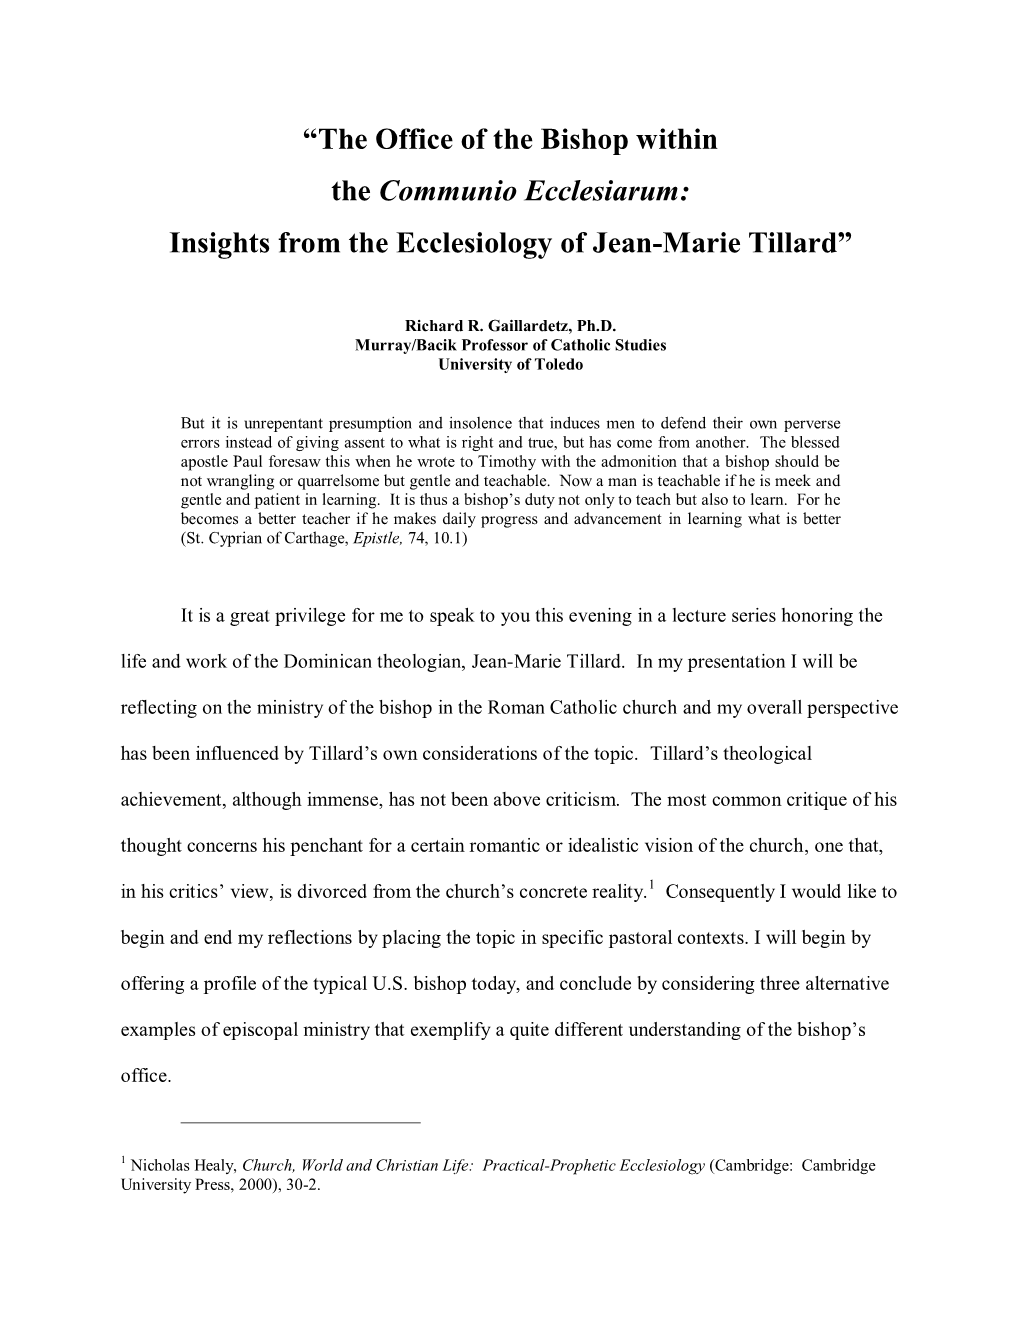 “The Office of the Bishop Within the Communio Ecclesiarum: Insights from the Ecclesiology of Jean-Marie Tillard”